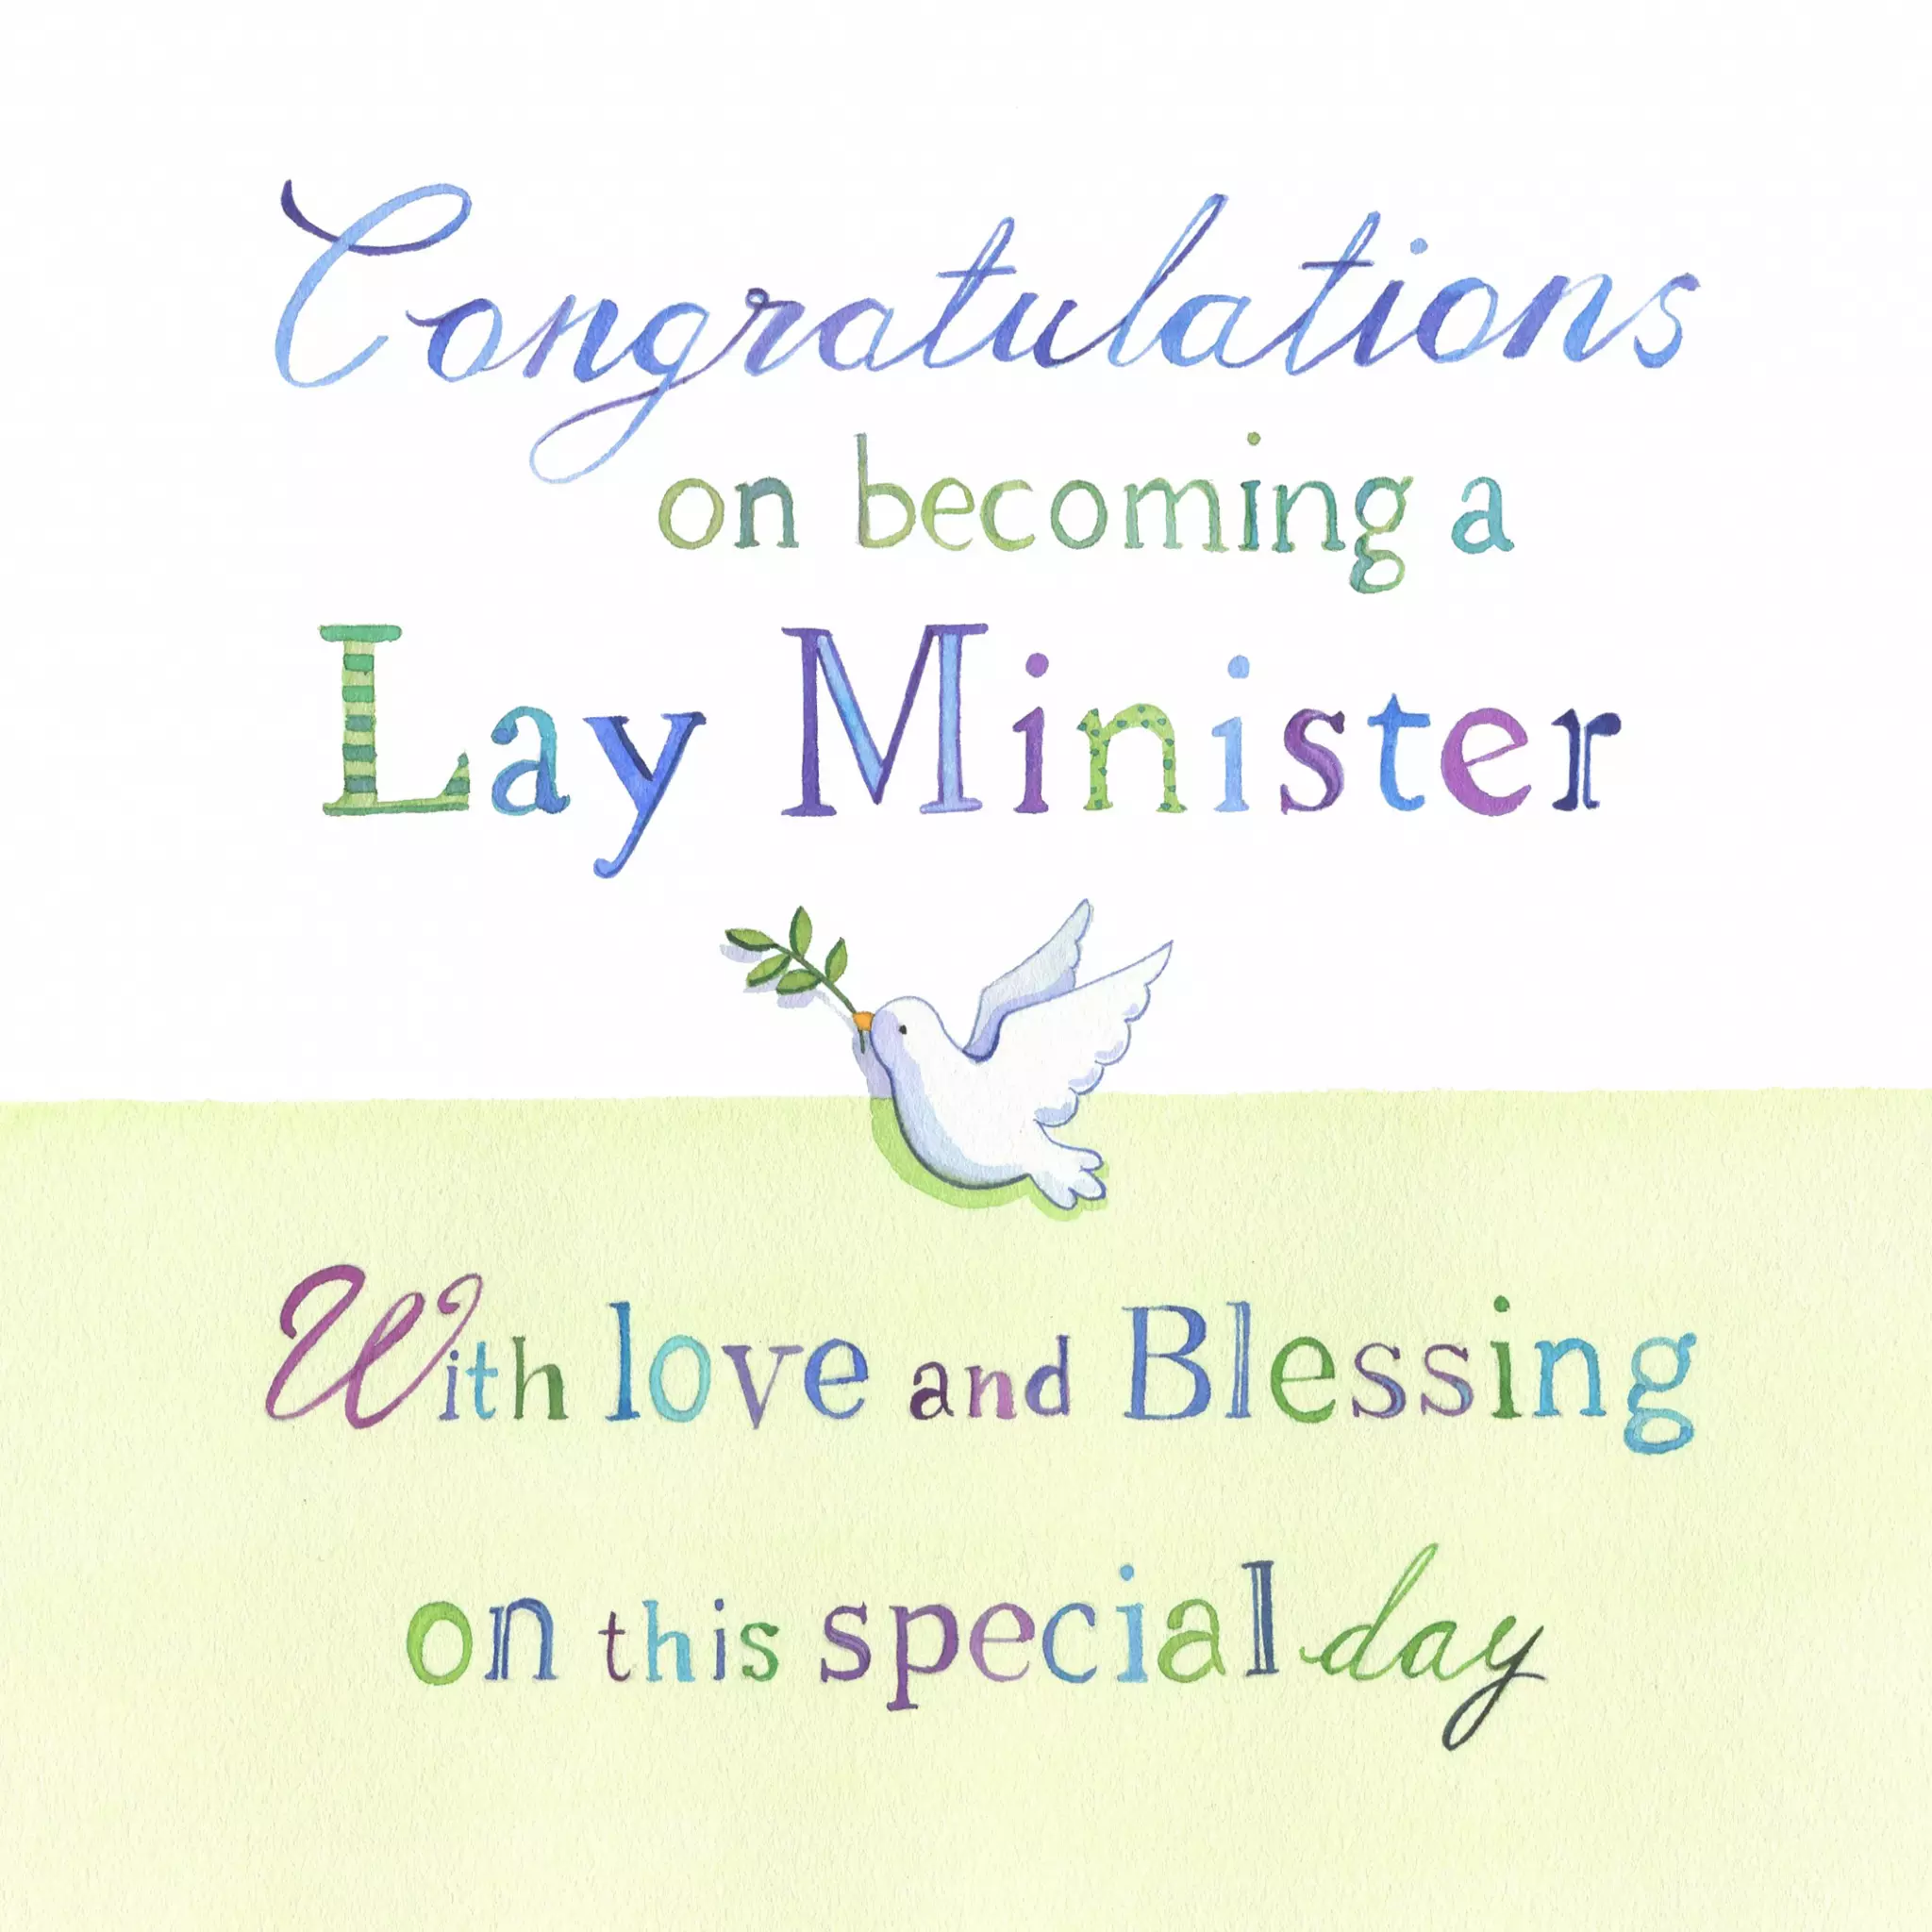 Lay Minister Single Card